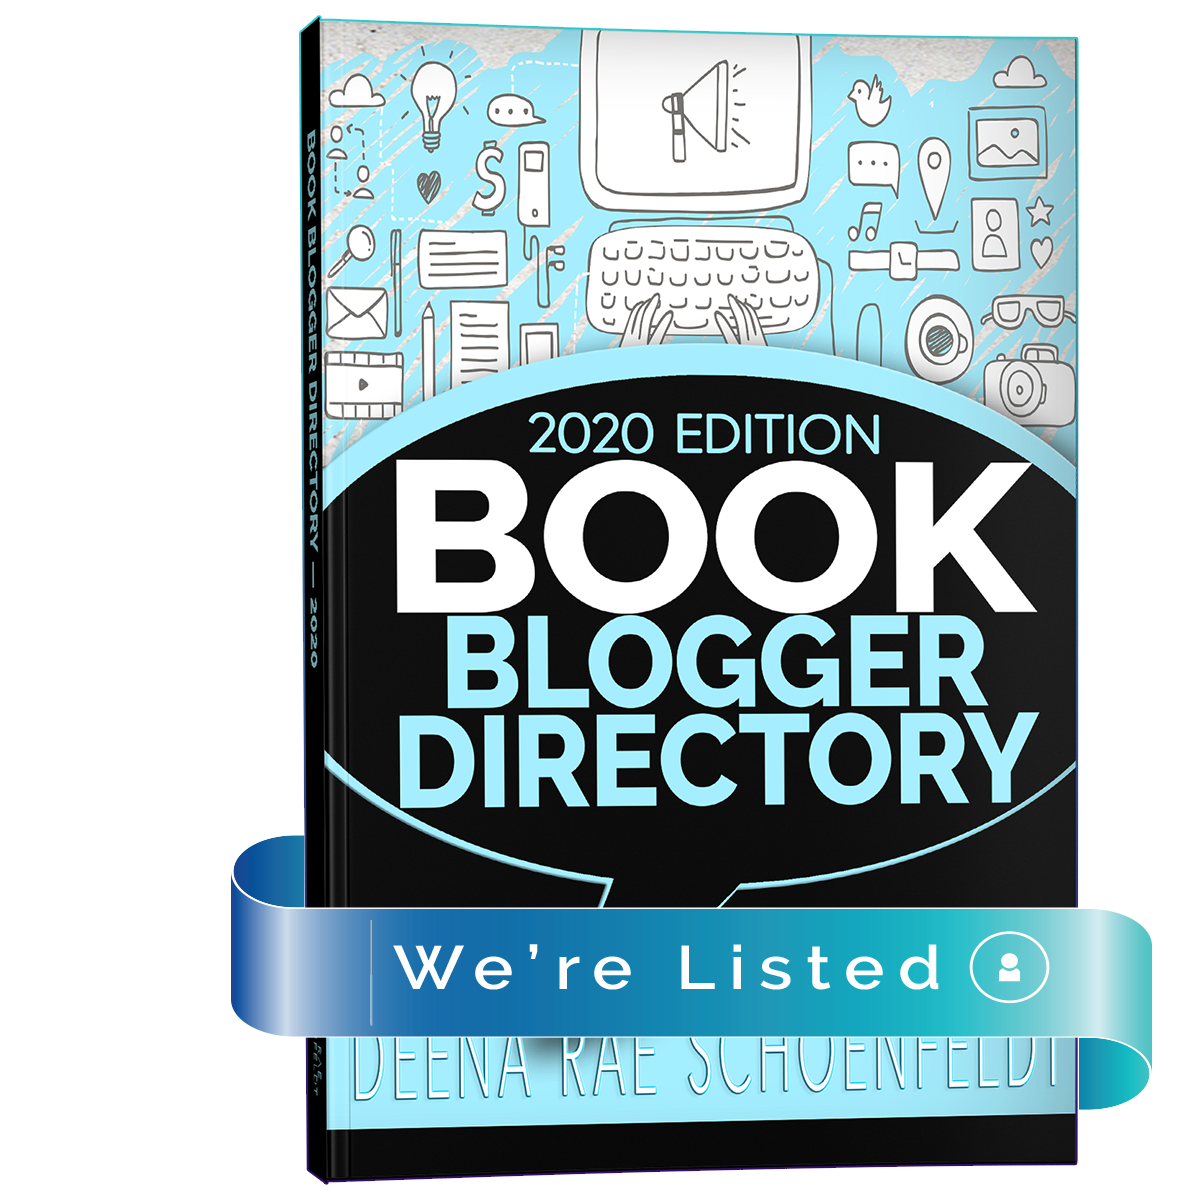 The Book Blogger Directory